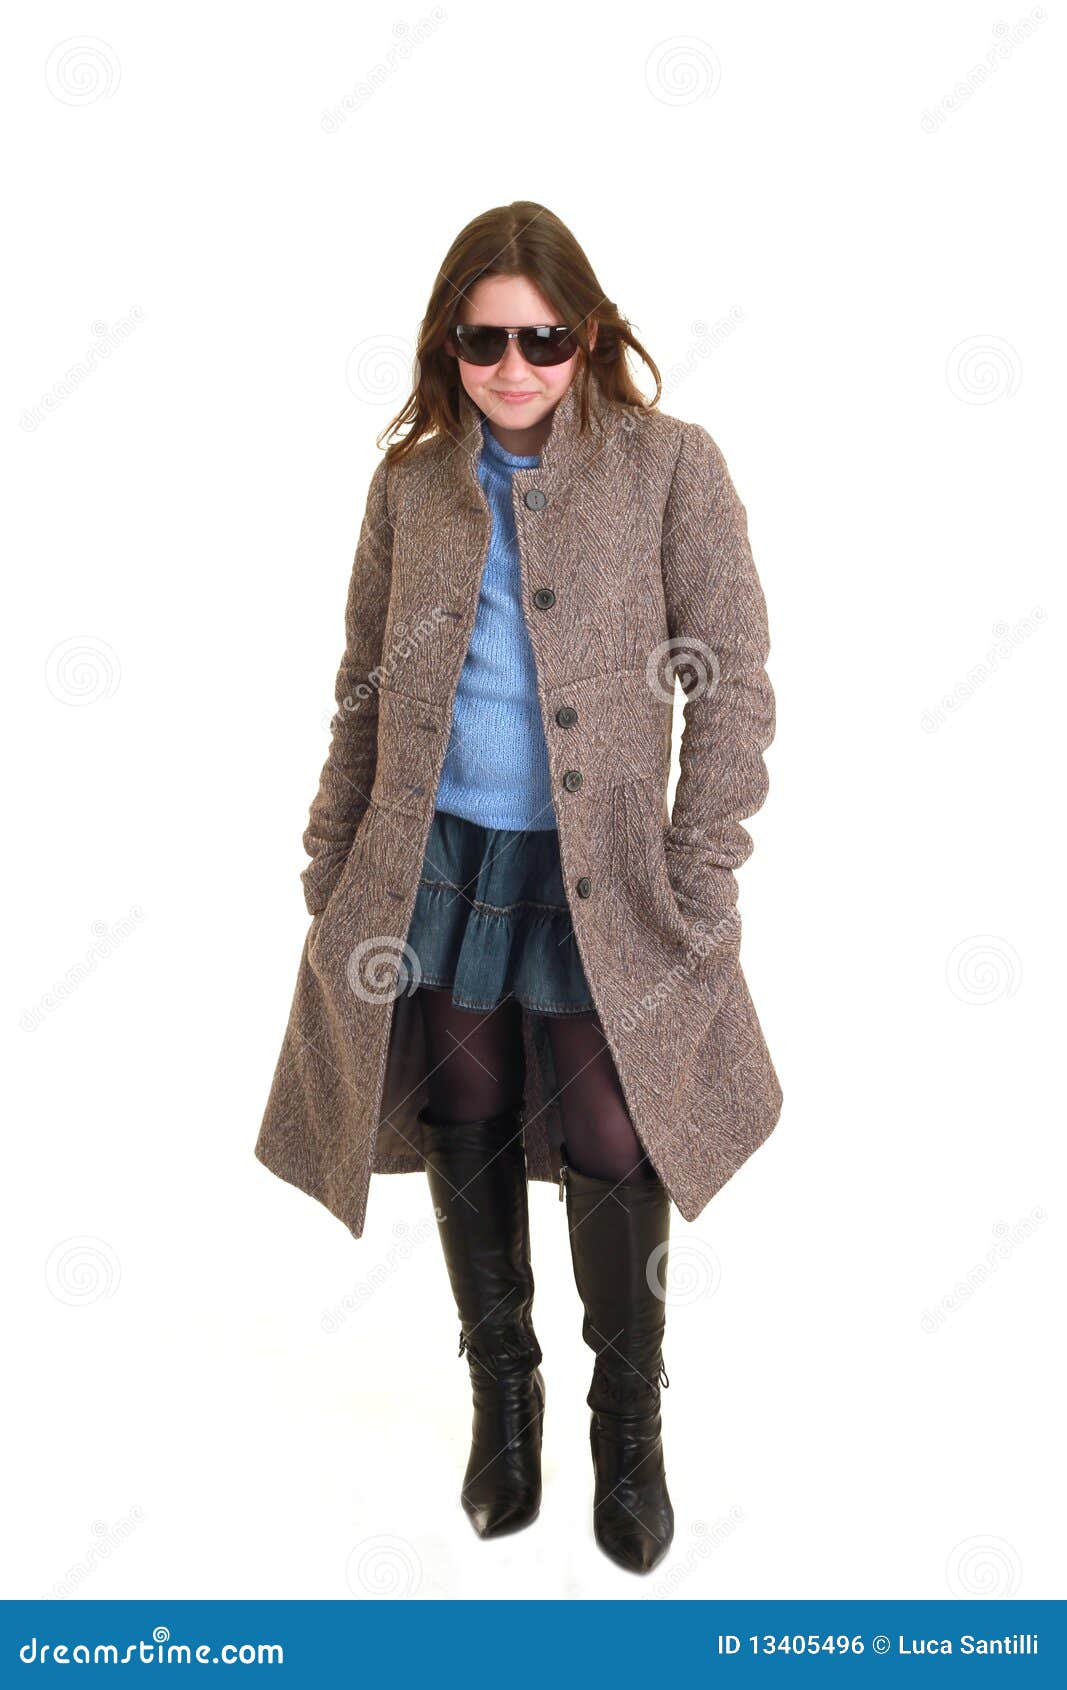 Casually dressed teenager stock photo. Image of action - 13405496